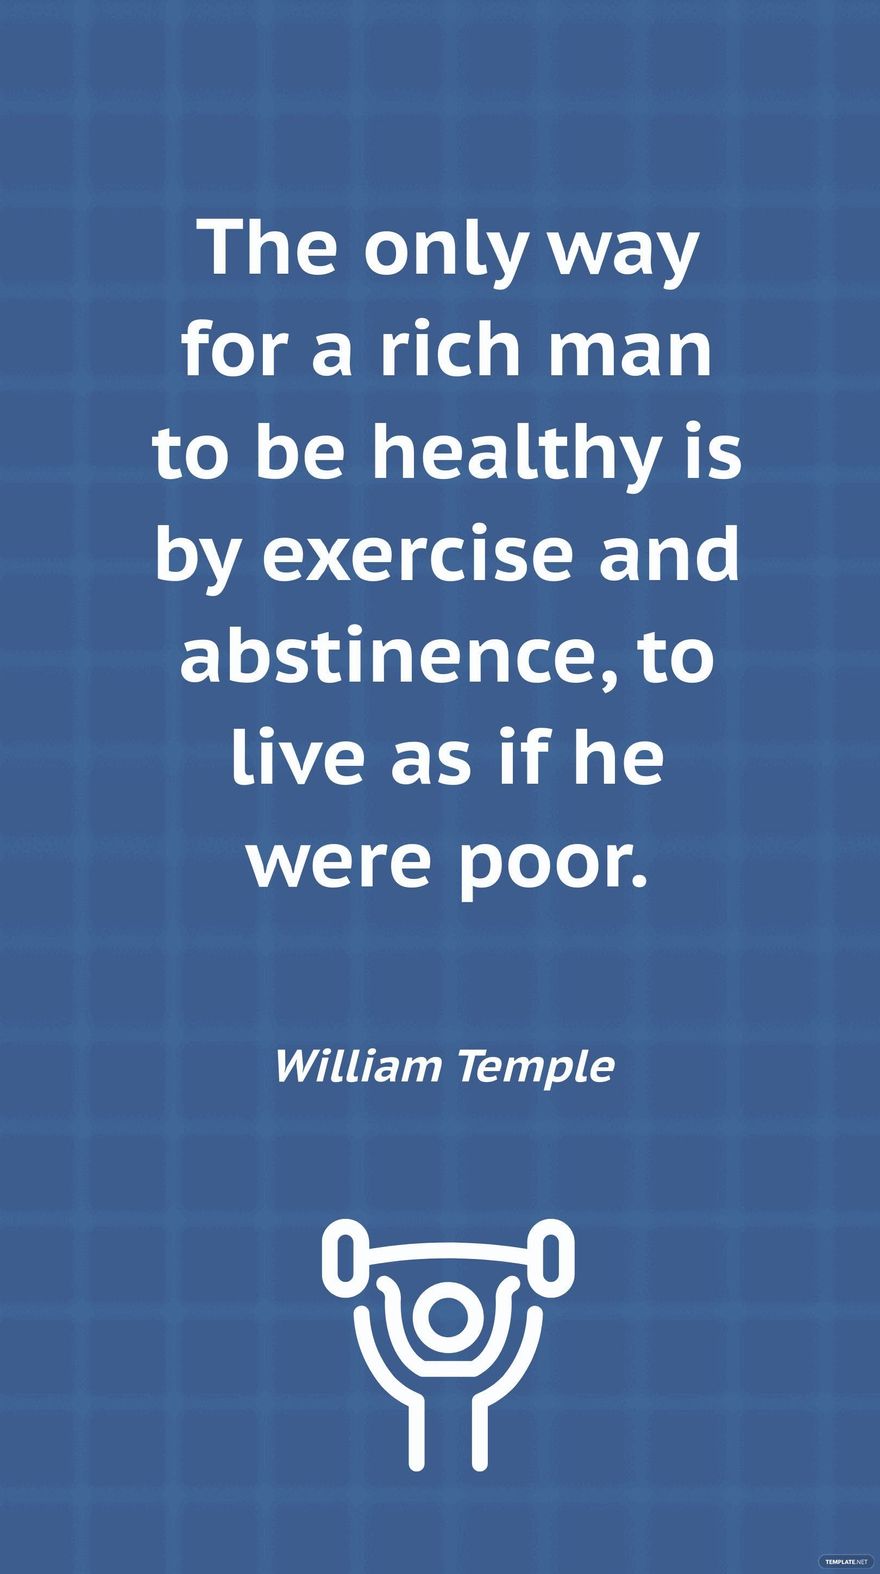 Free William Temple - The only way for a rich man to be healthy is by exercise and abstinence, to live as if he were poor. in JPG